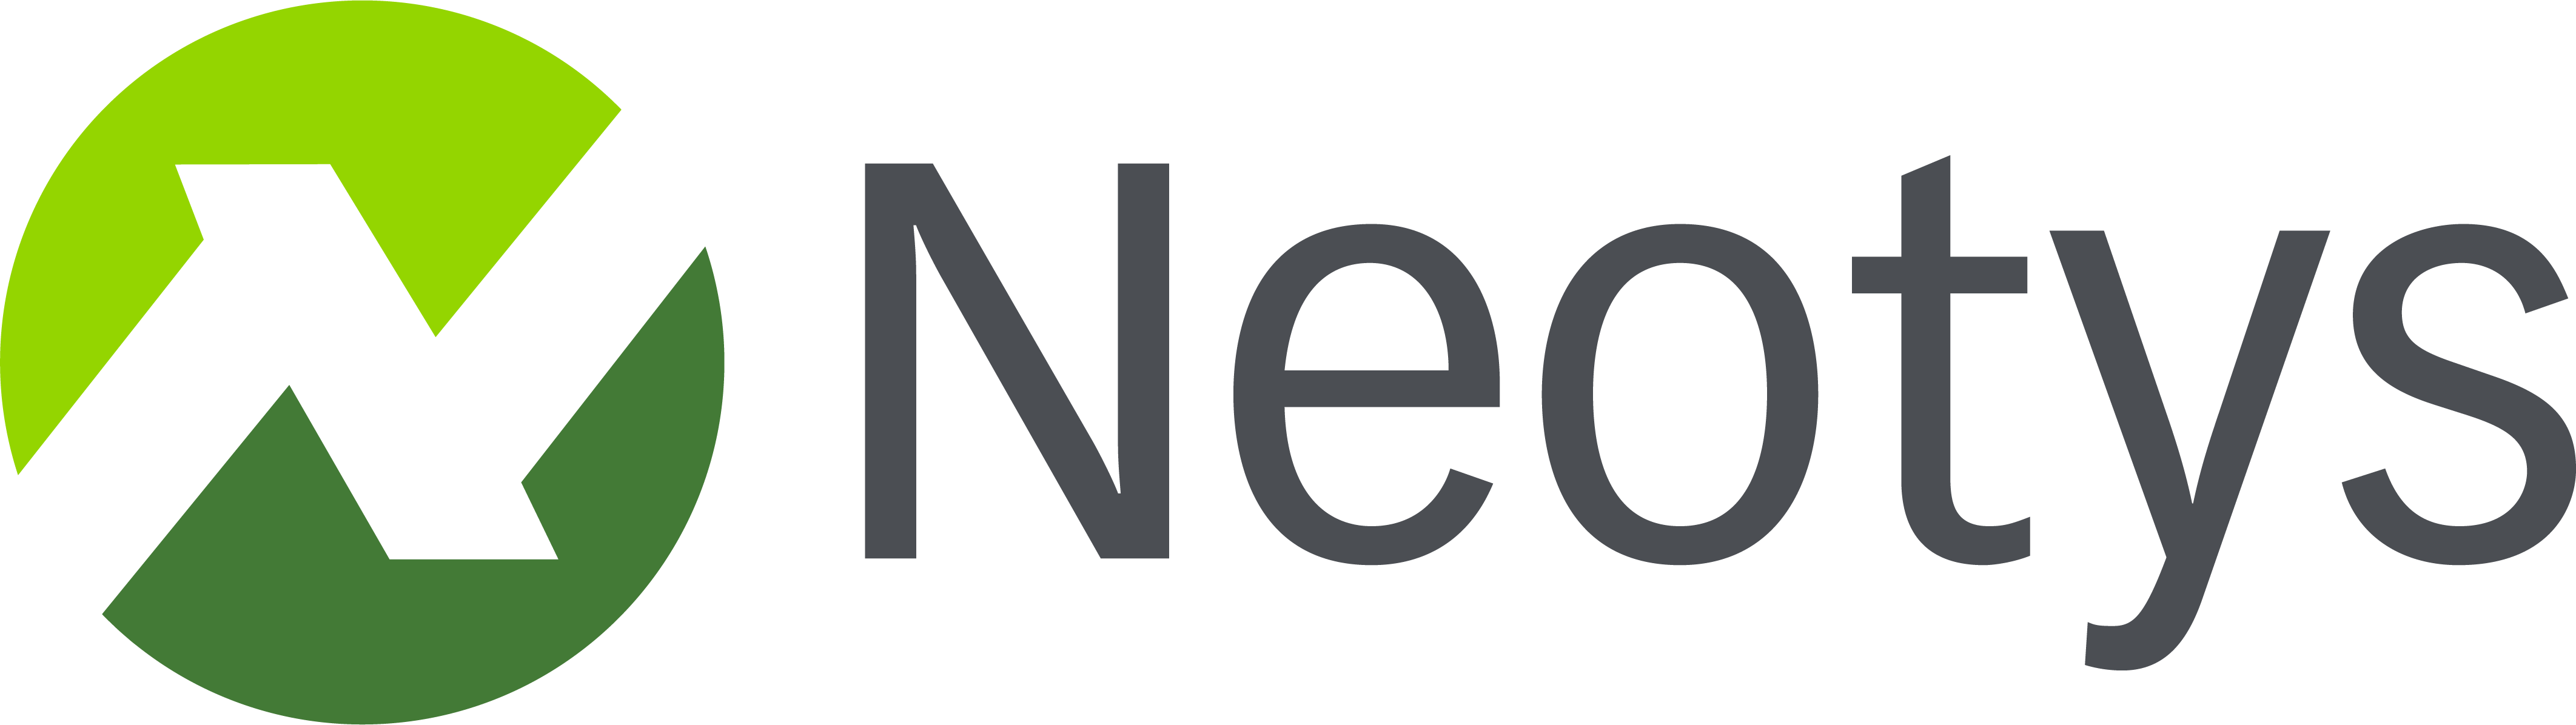 Neotys-Corporate-Primary_HI_RES-01.png